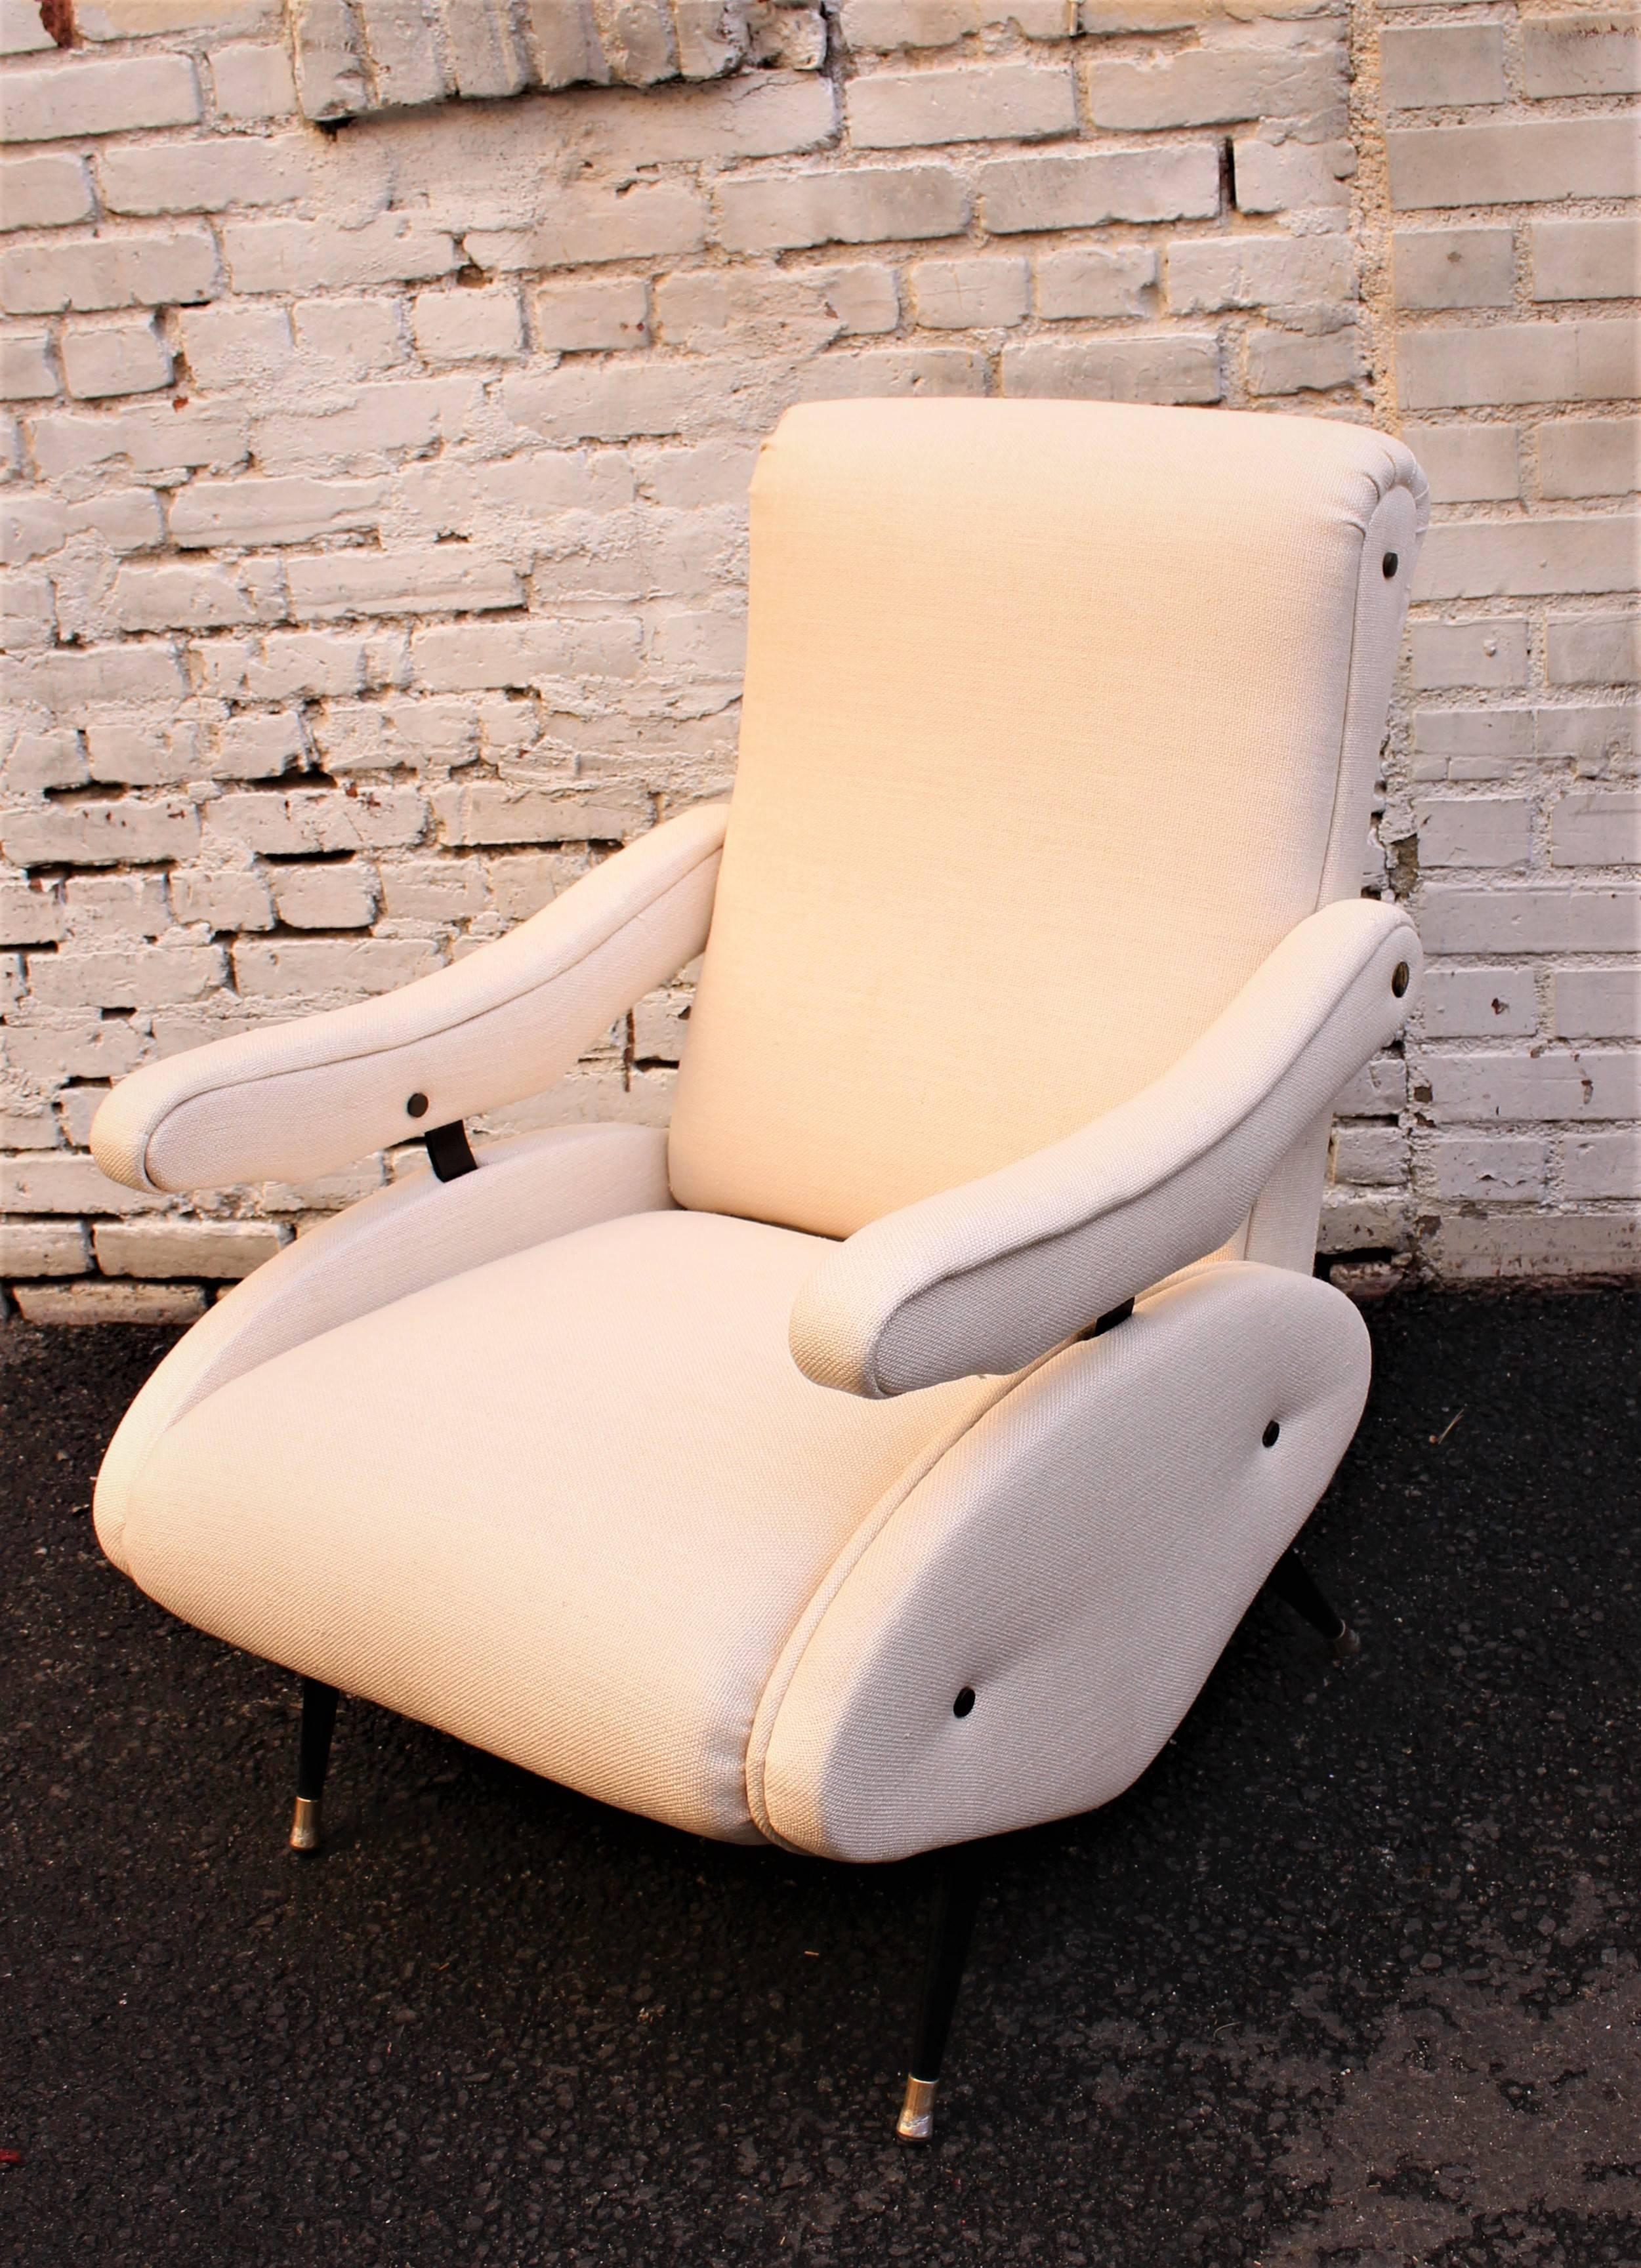 Italian 1950s recliner chairs just reupholstered in linen Pana cotta,
material.